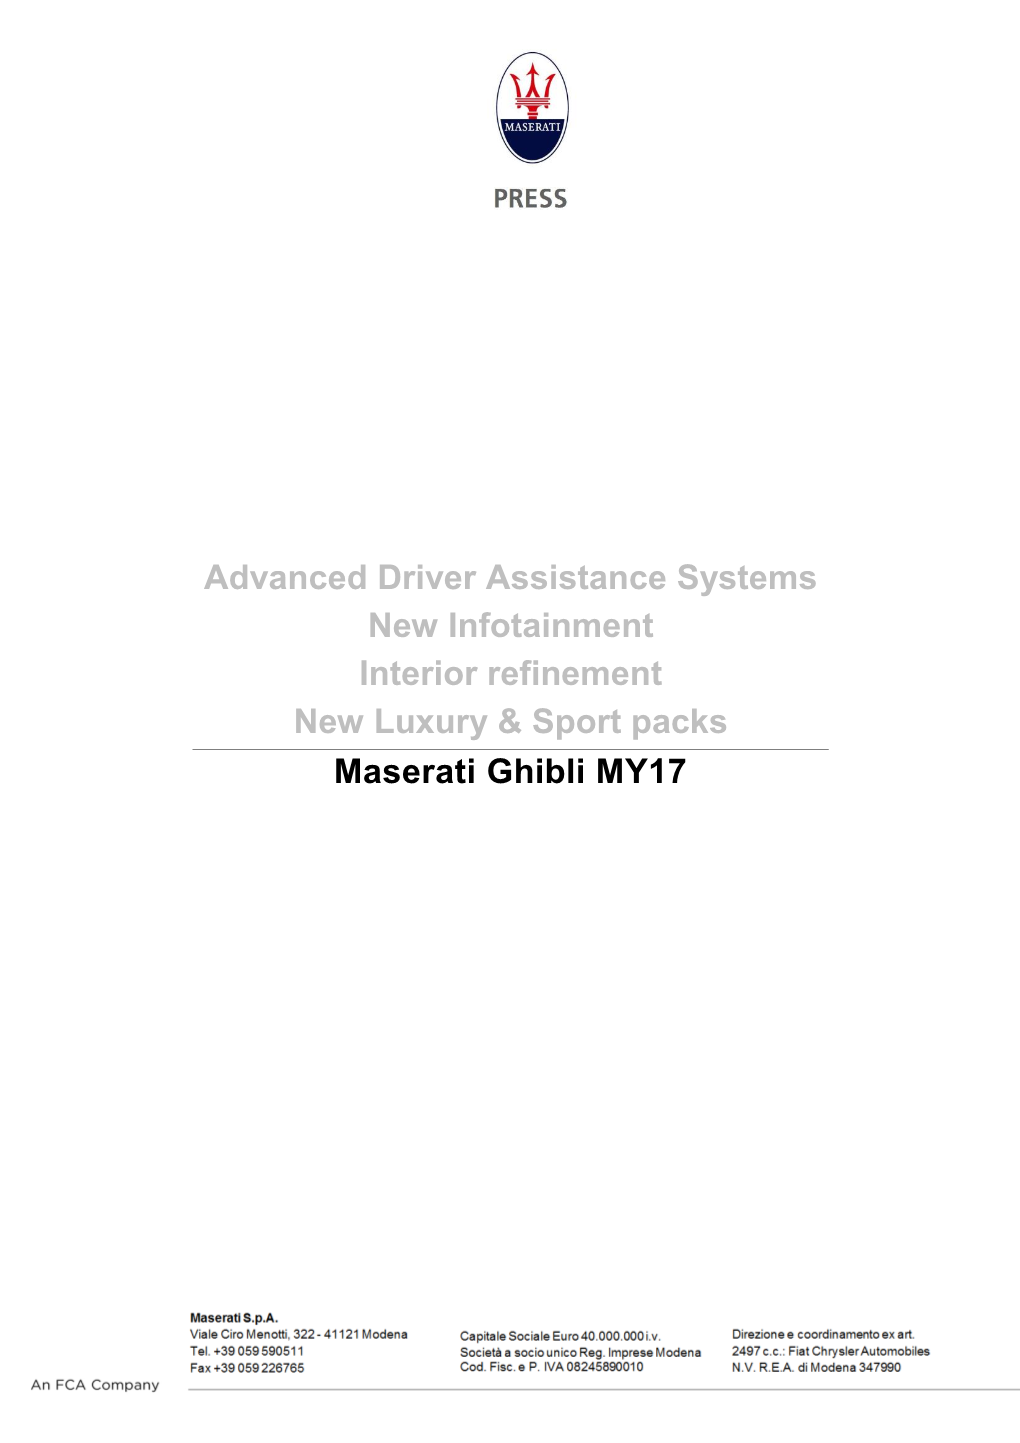 Advanced Driver Assistance Systems New Infotainment Interior Refinement New Luxury & Sport Packs Maserati Ghibli MY17